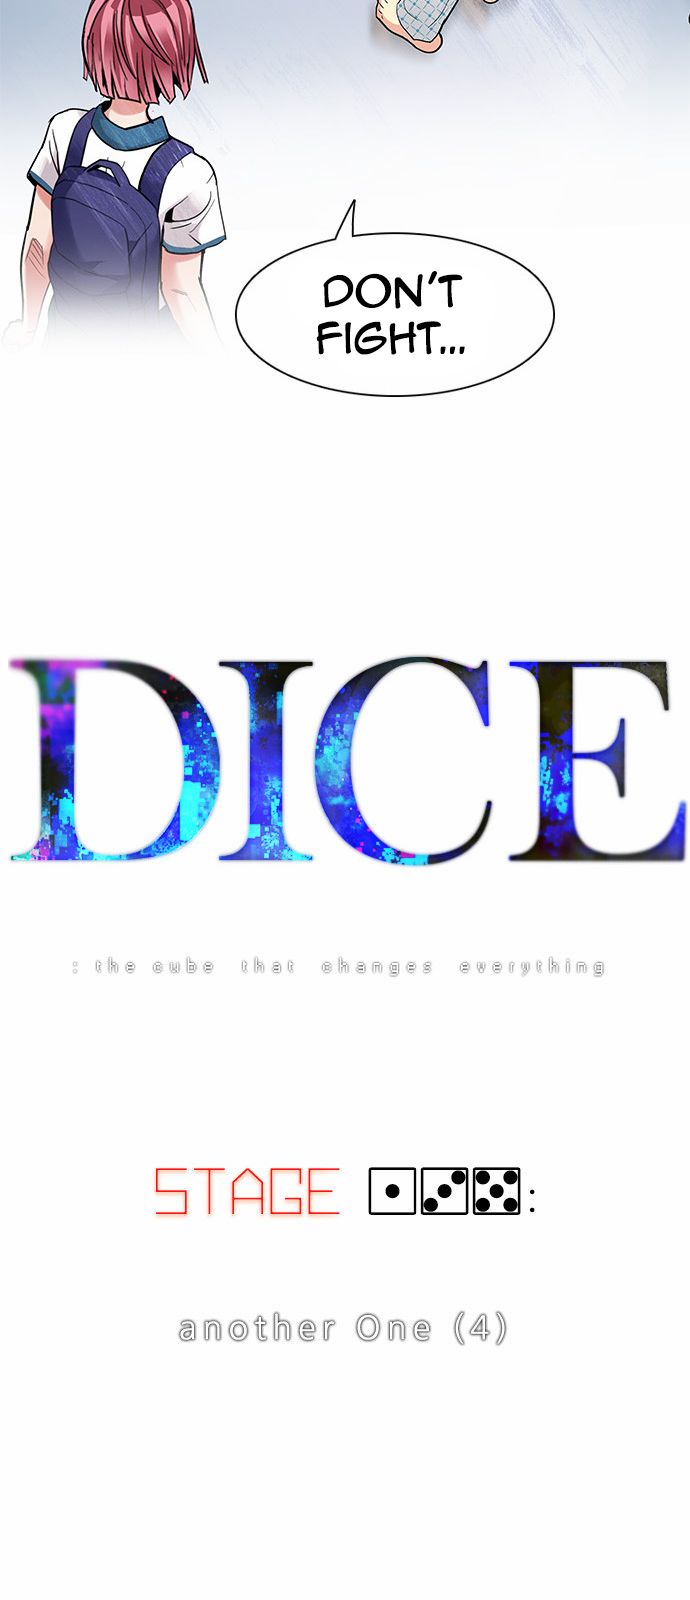 DICE: The Cube that Changes Everything 135